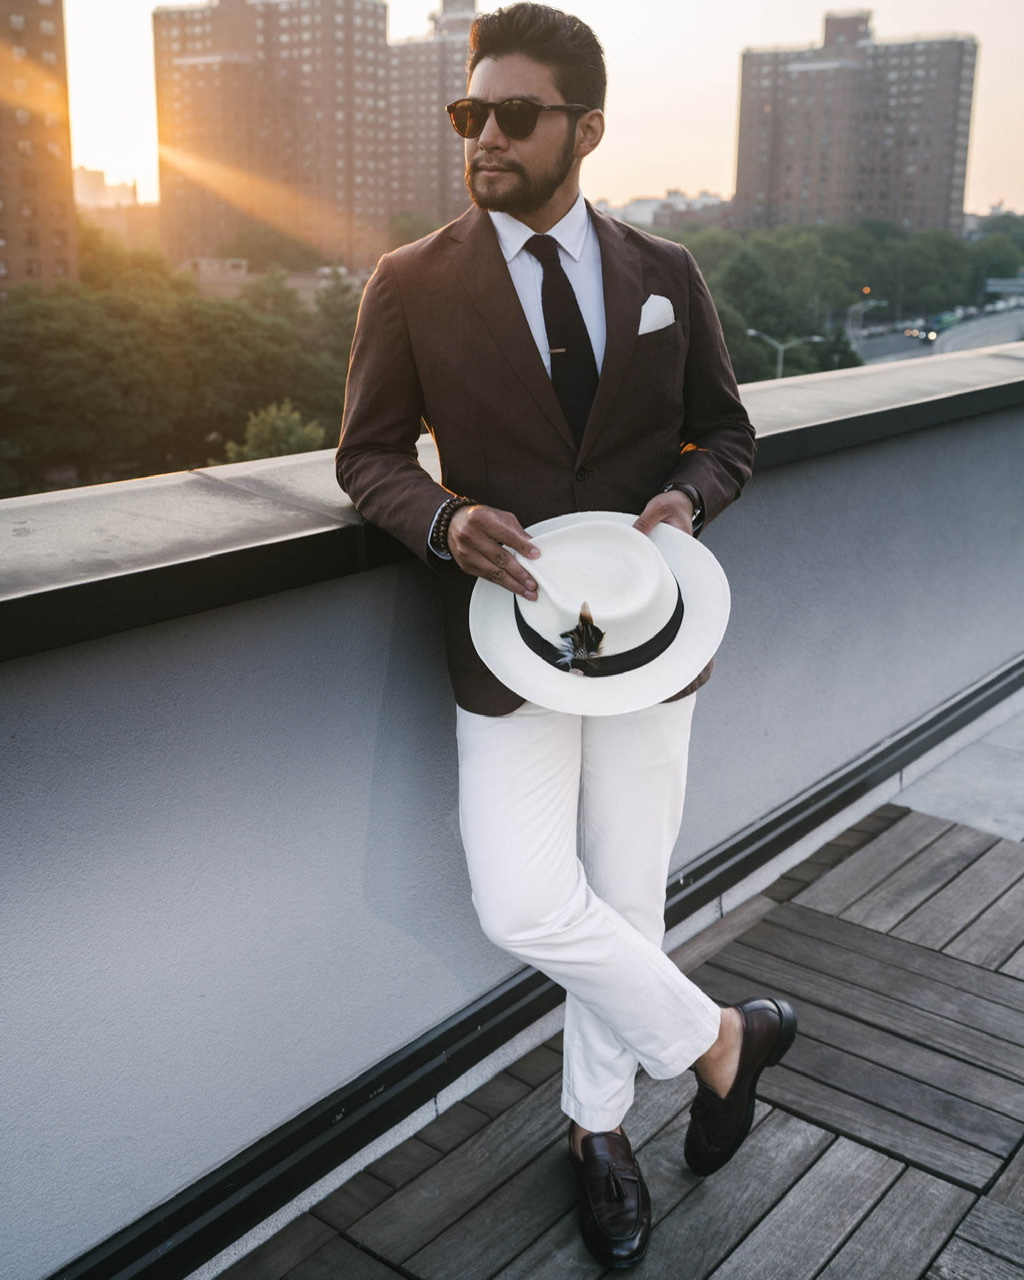 peter manning nyc - brown linen blazer with white chinos - panama hat styles - dandy in the bronx - brown loafers - short men styles - styles for short men